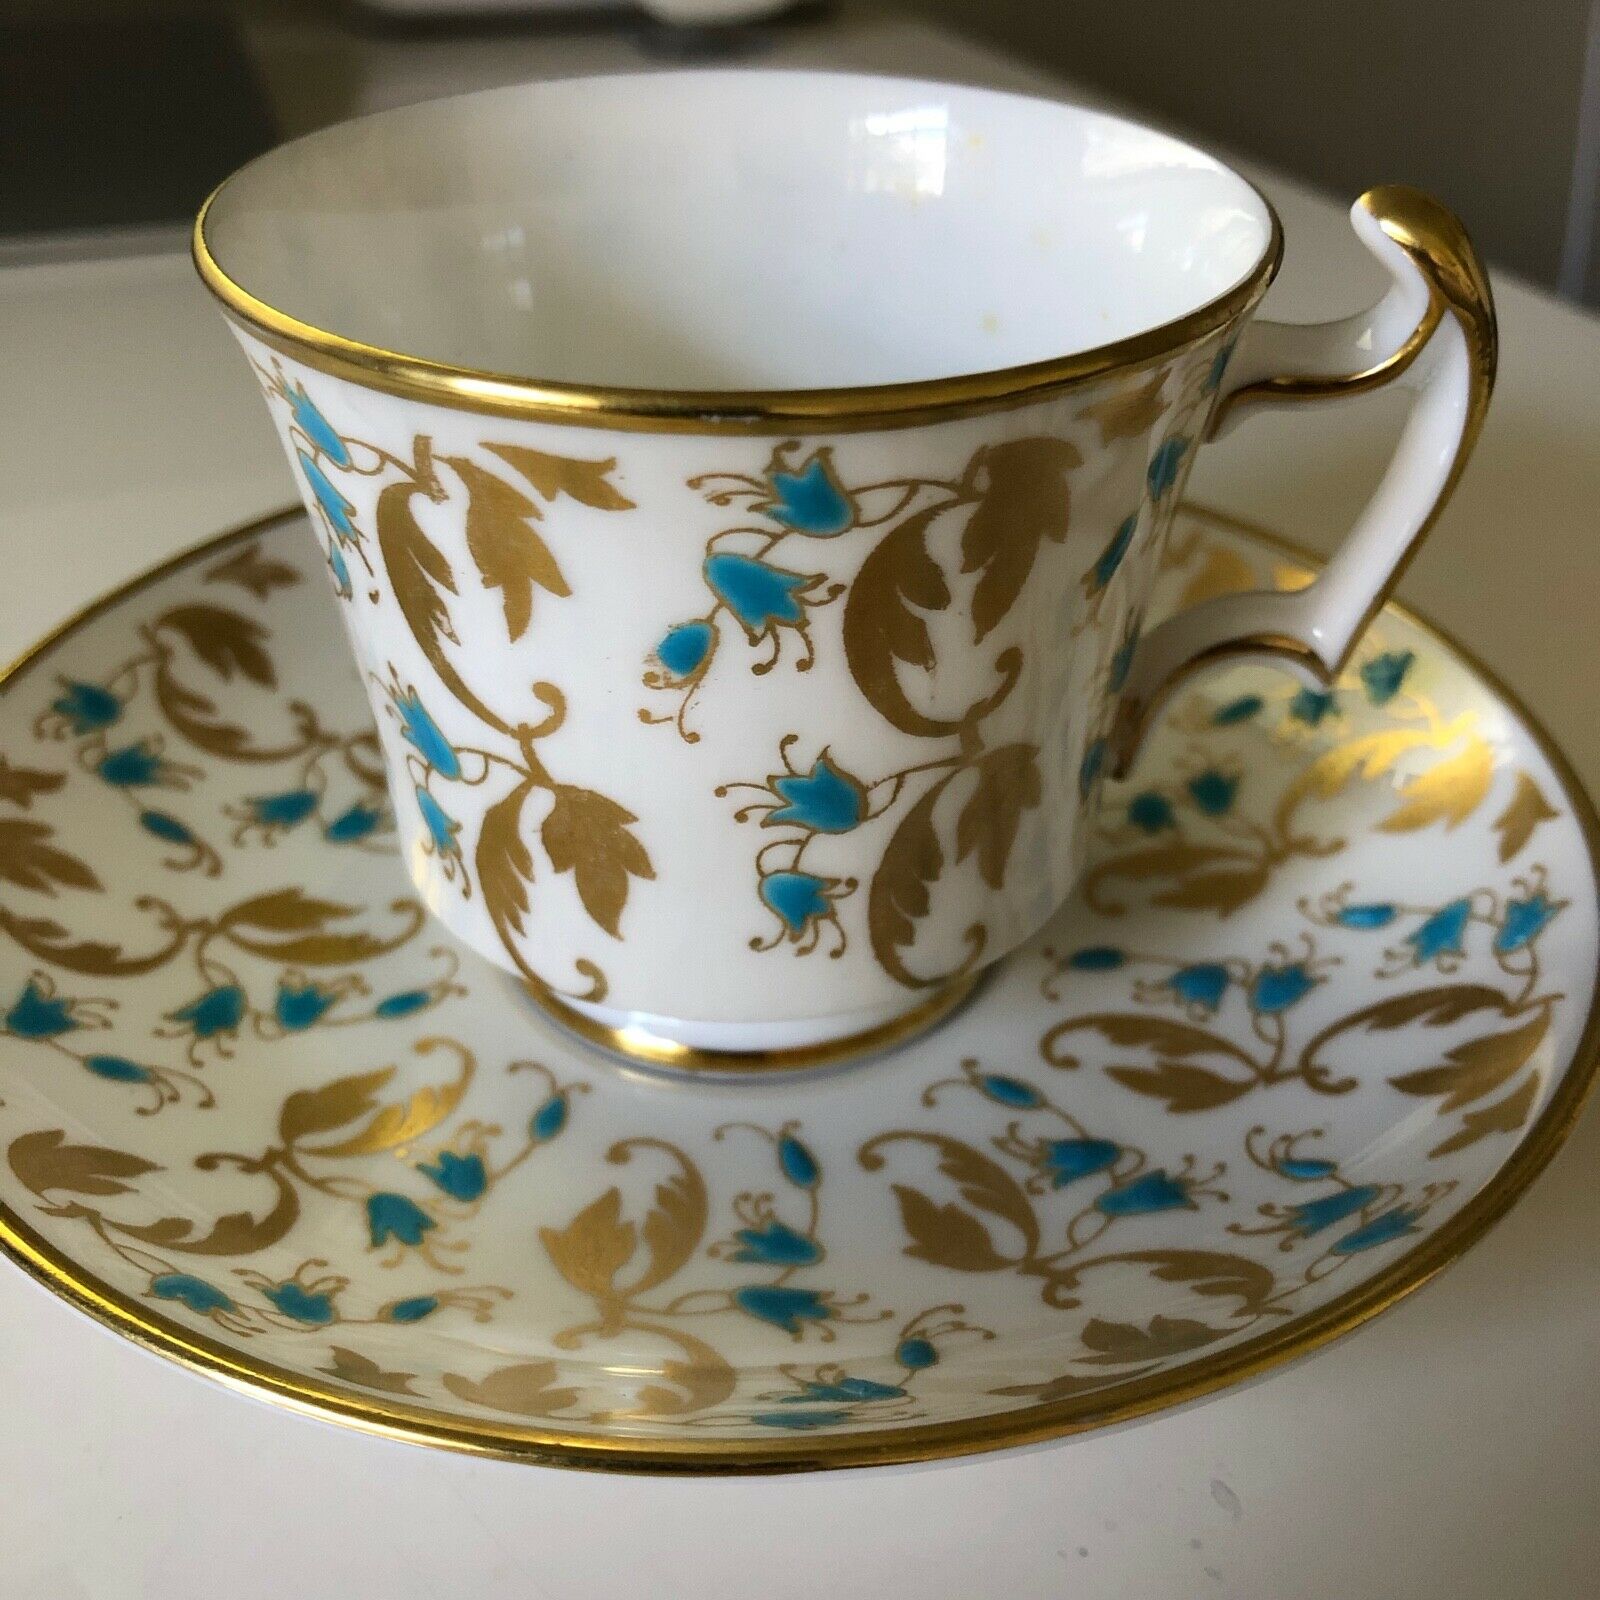 Royal Chelsea #3114 A England Turquoise Gold 2 3/8" Demitasse Cup And Saucer Set